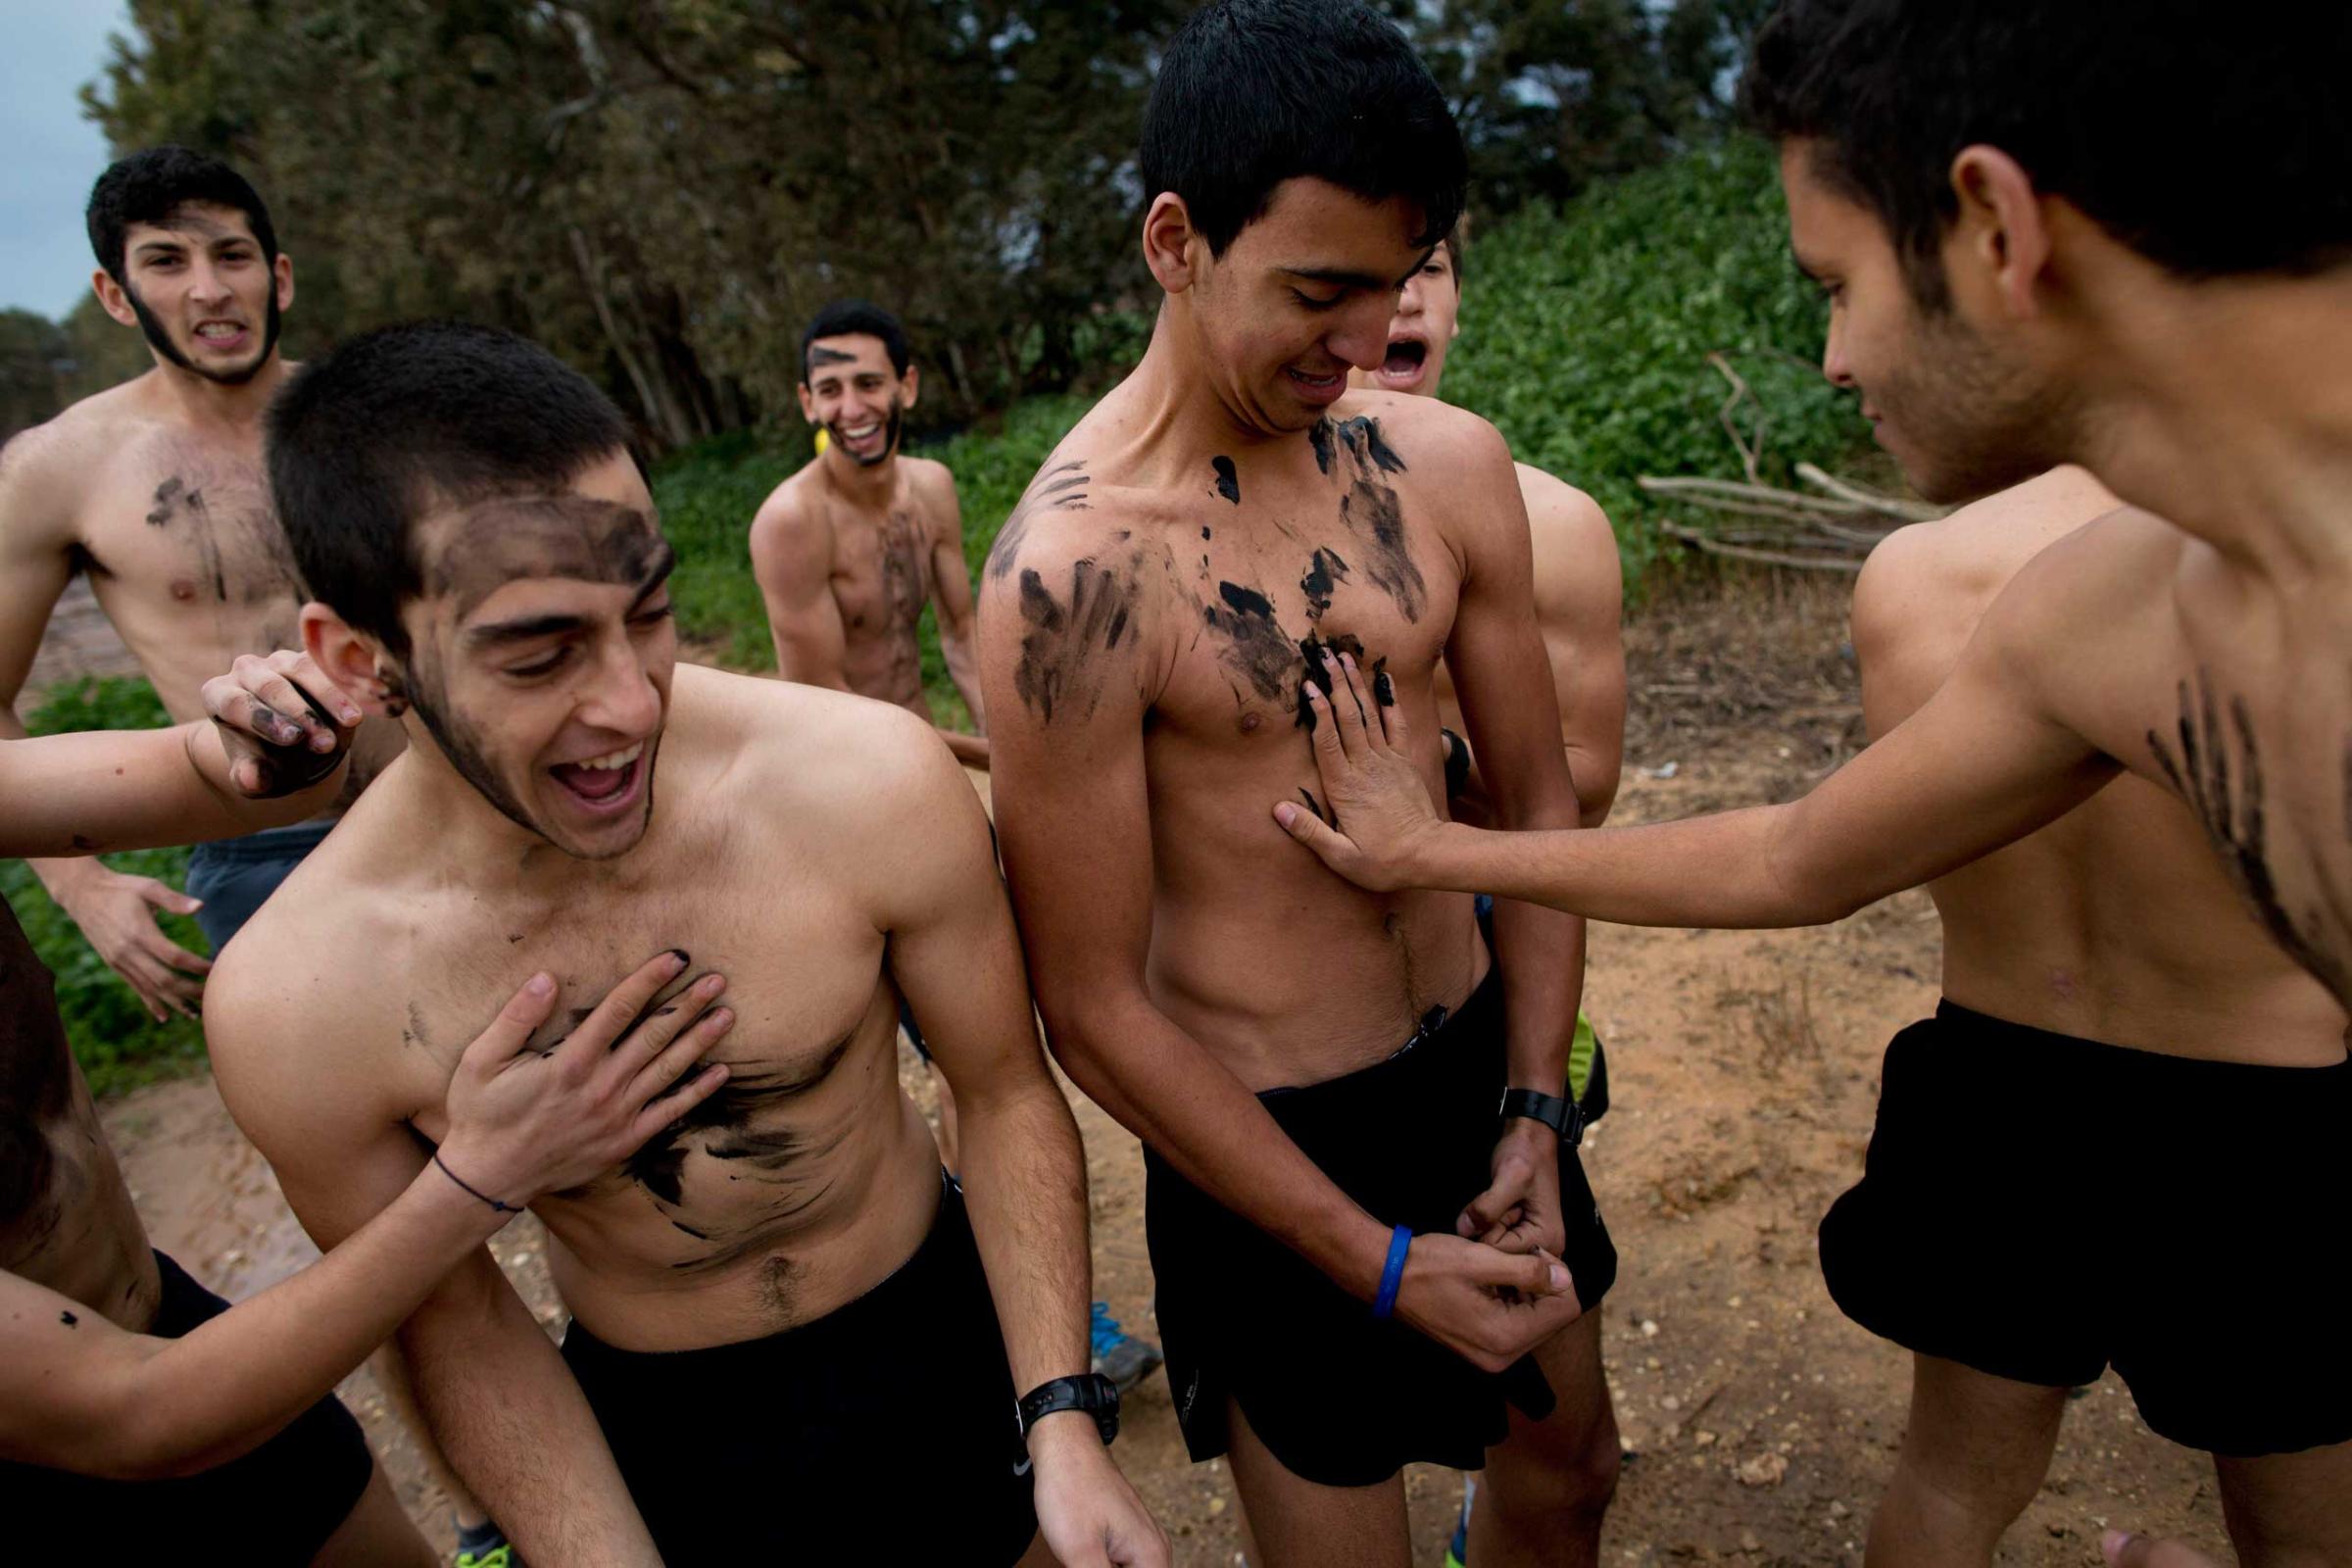 High-school seniors preparing to join the Israeli military later this year take part in a privately run training camp for military combat fitness near Yakum, central Israel, Feb. 13, 2015.